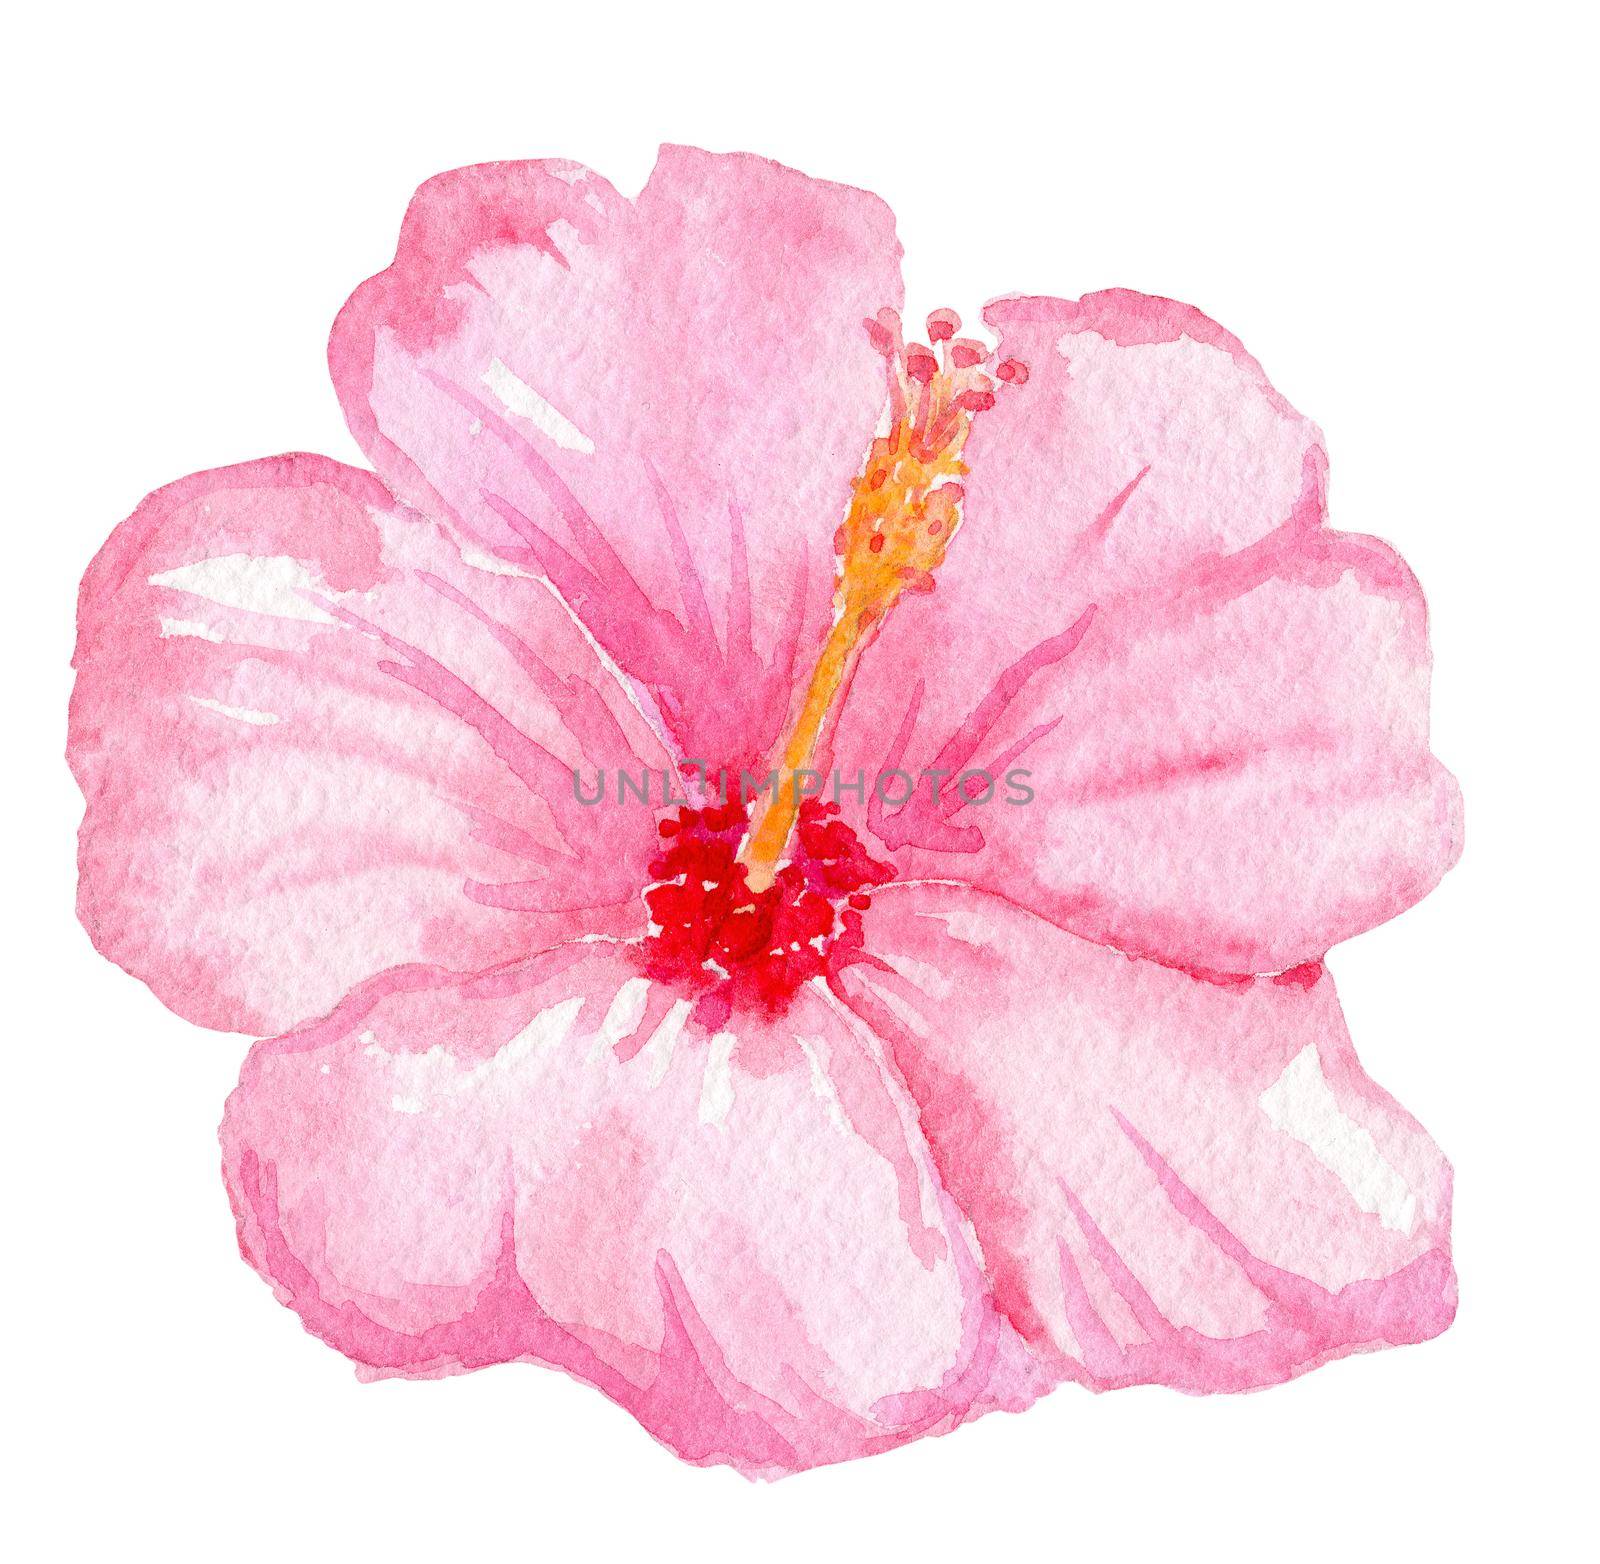 watercolor hand drawn pink hibiscus flower isolated on white background. Tropical flora